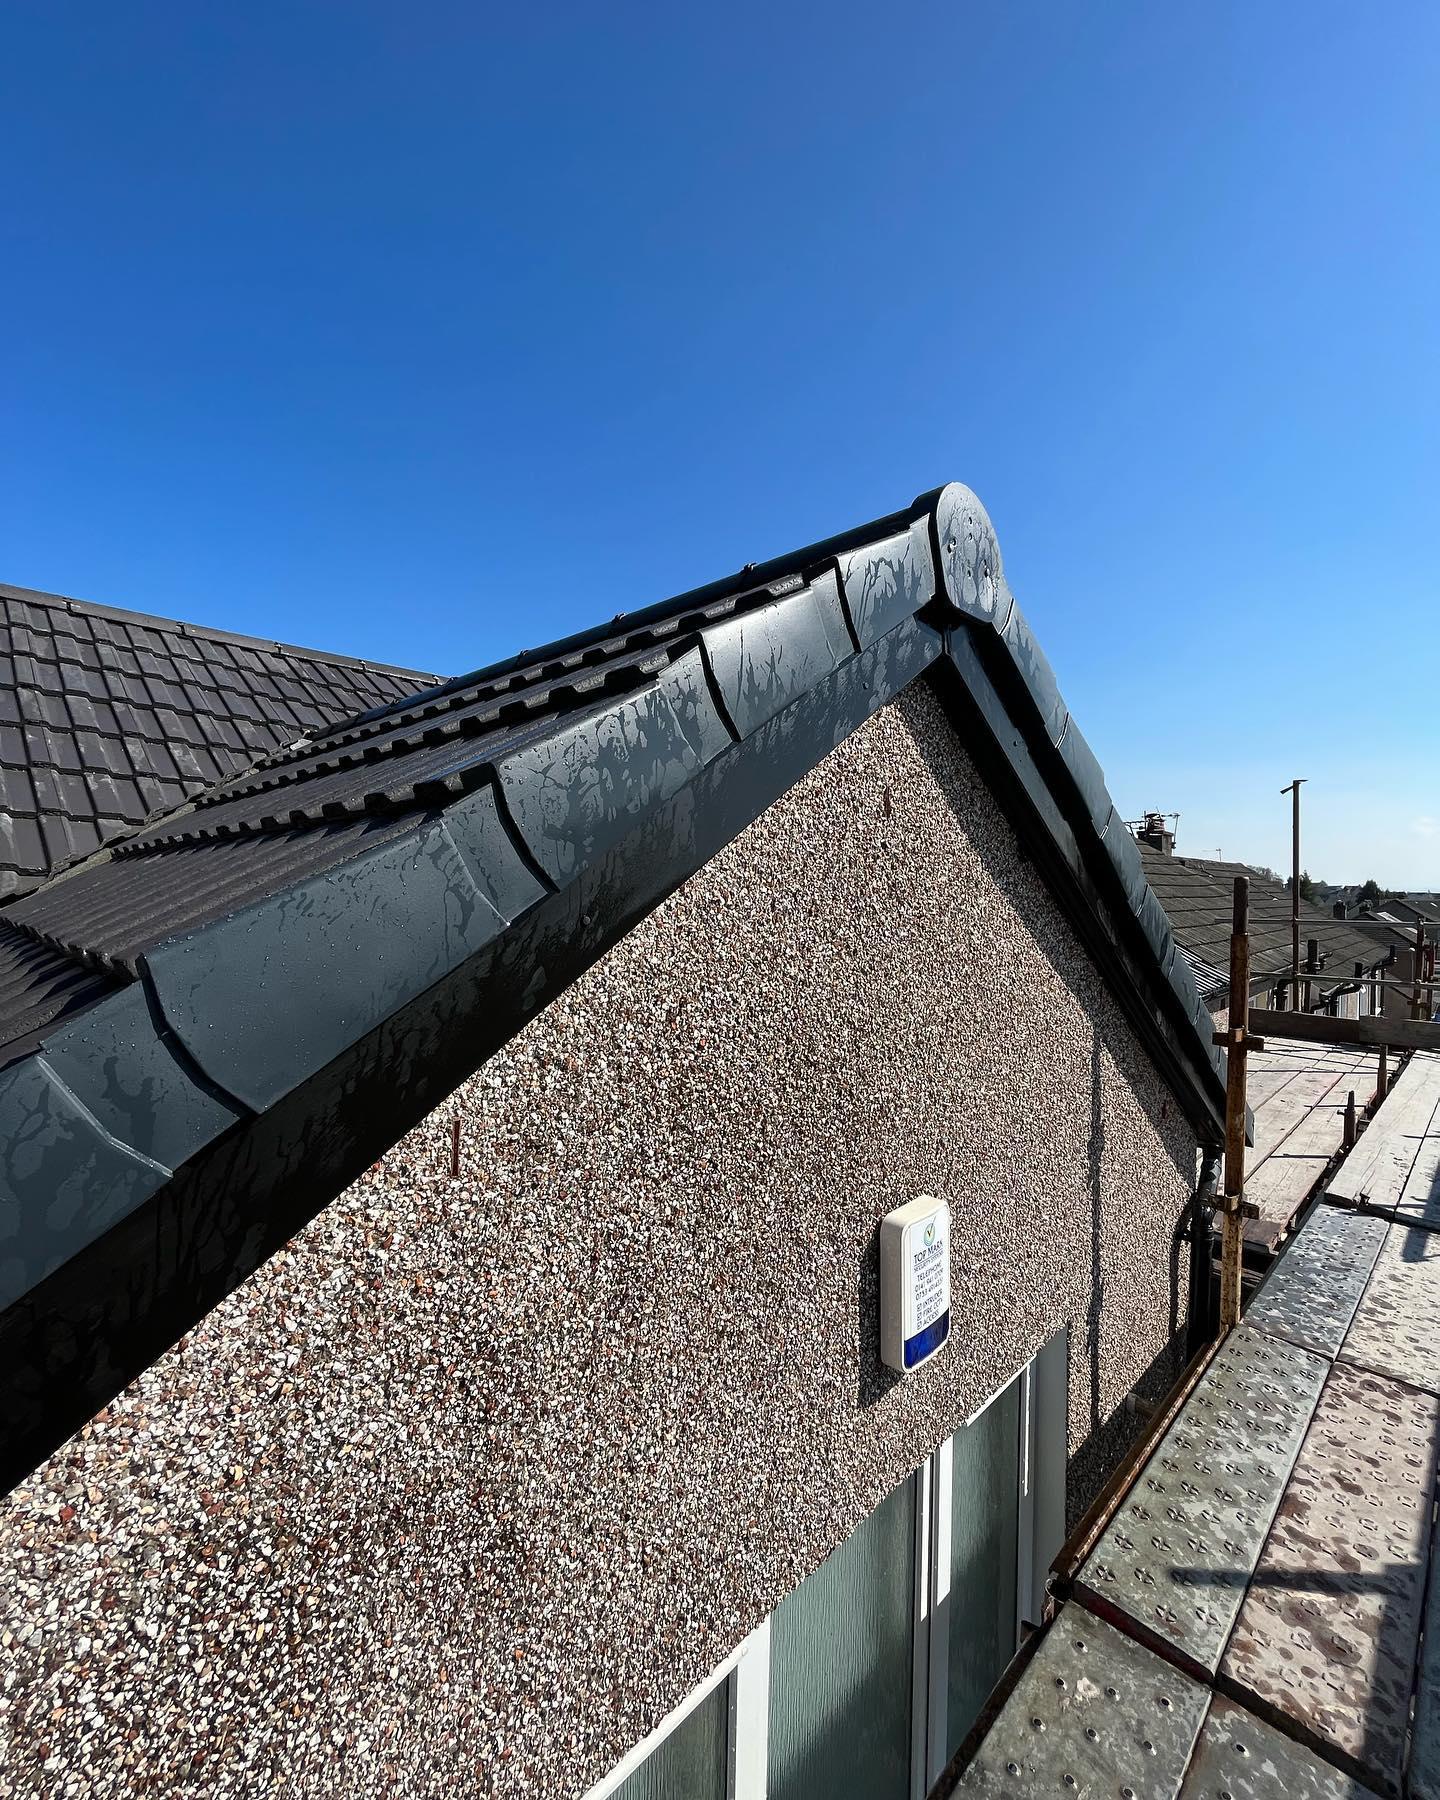 Images ML Roofing